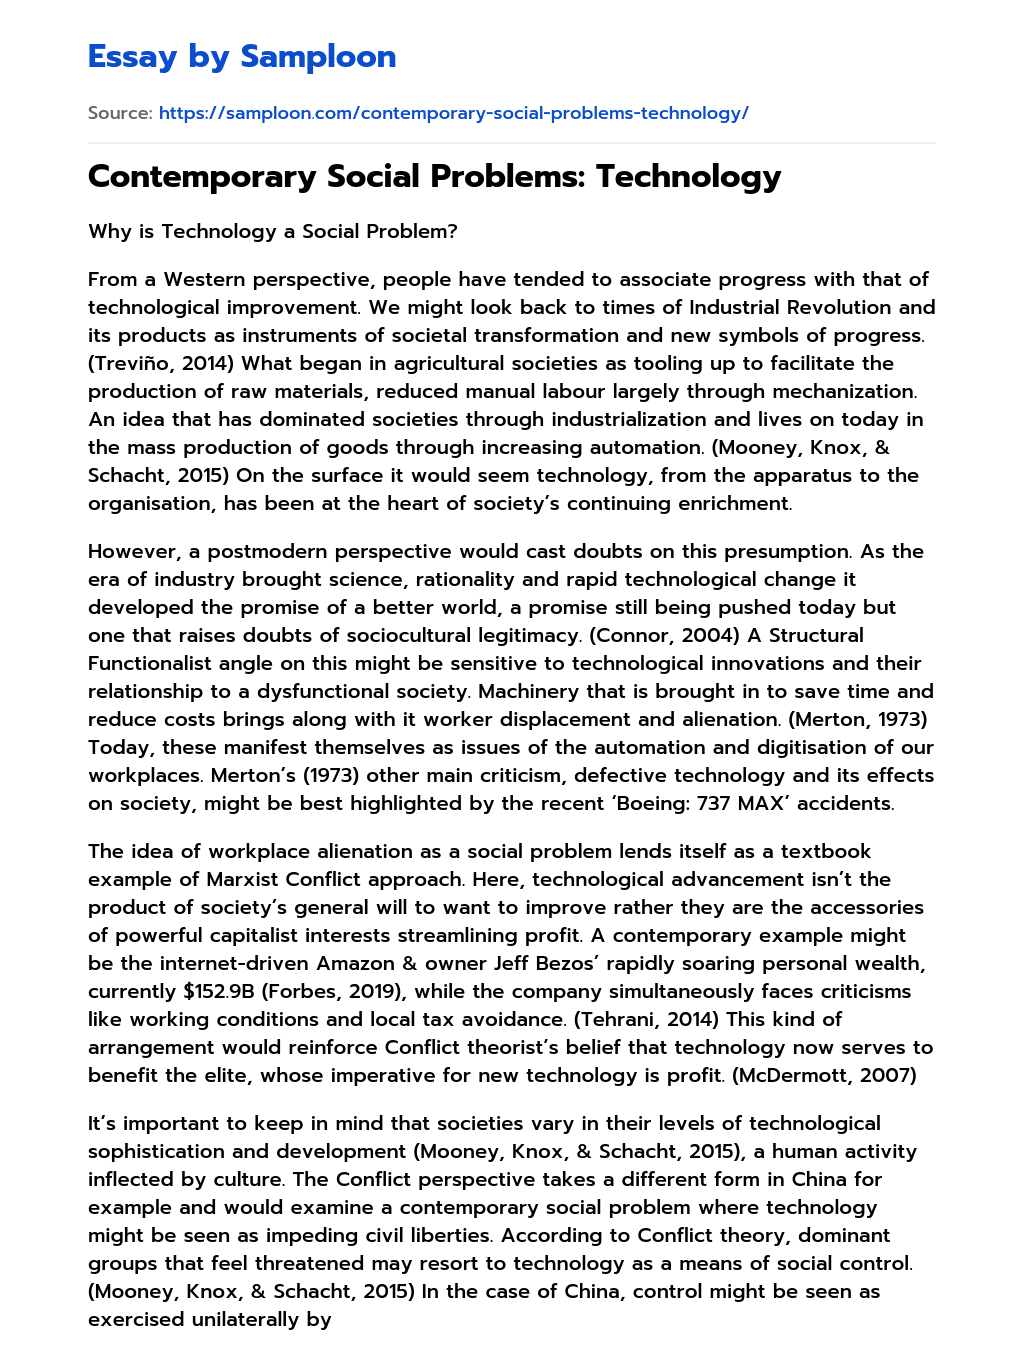 technology and socialization essay